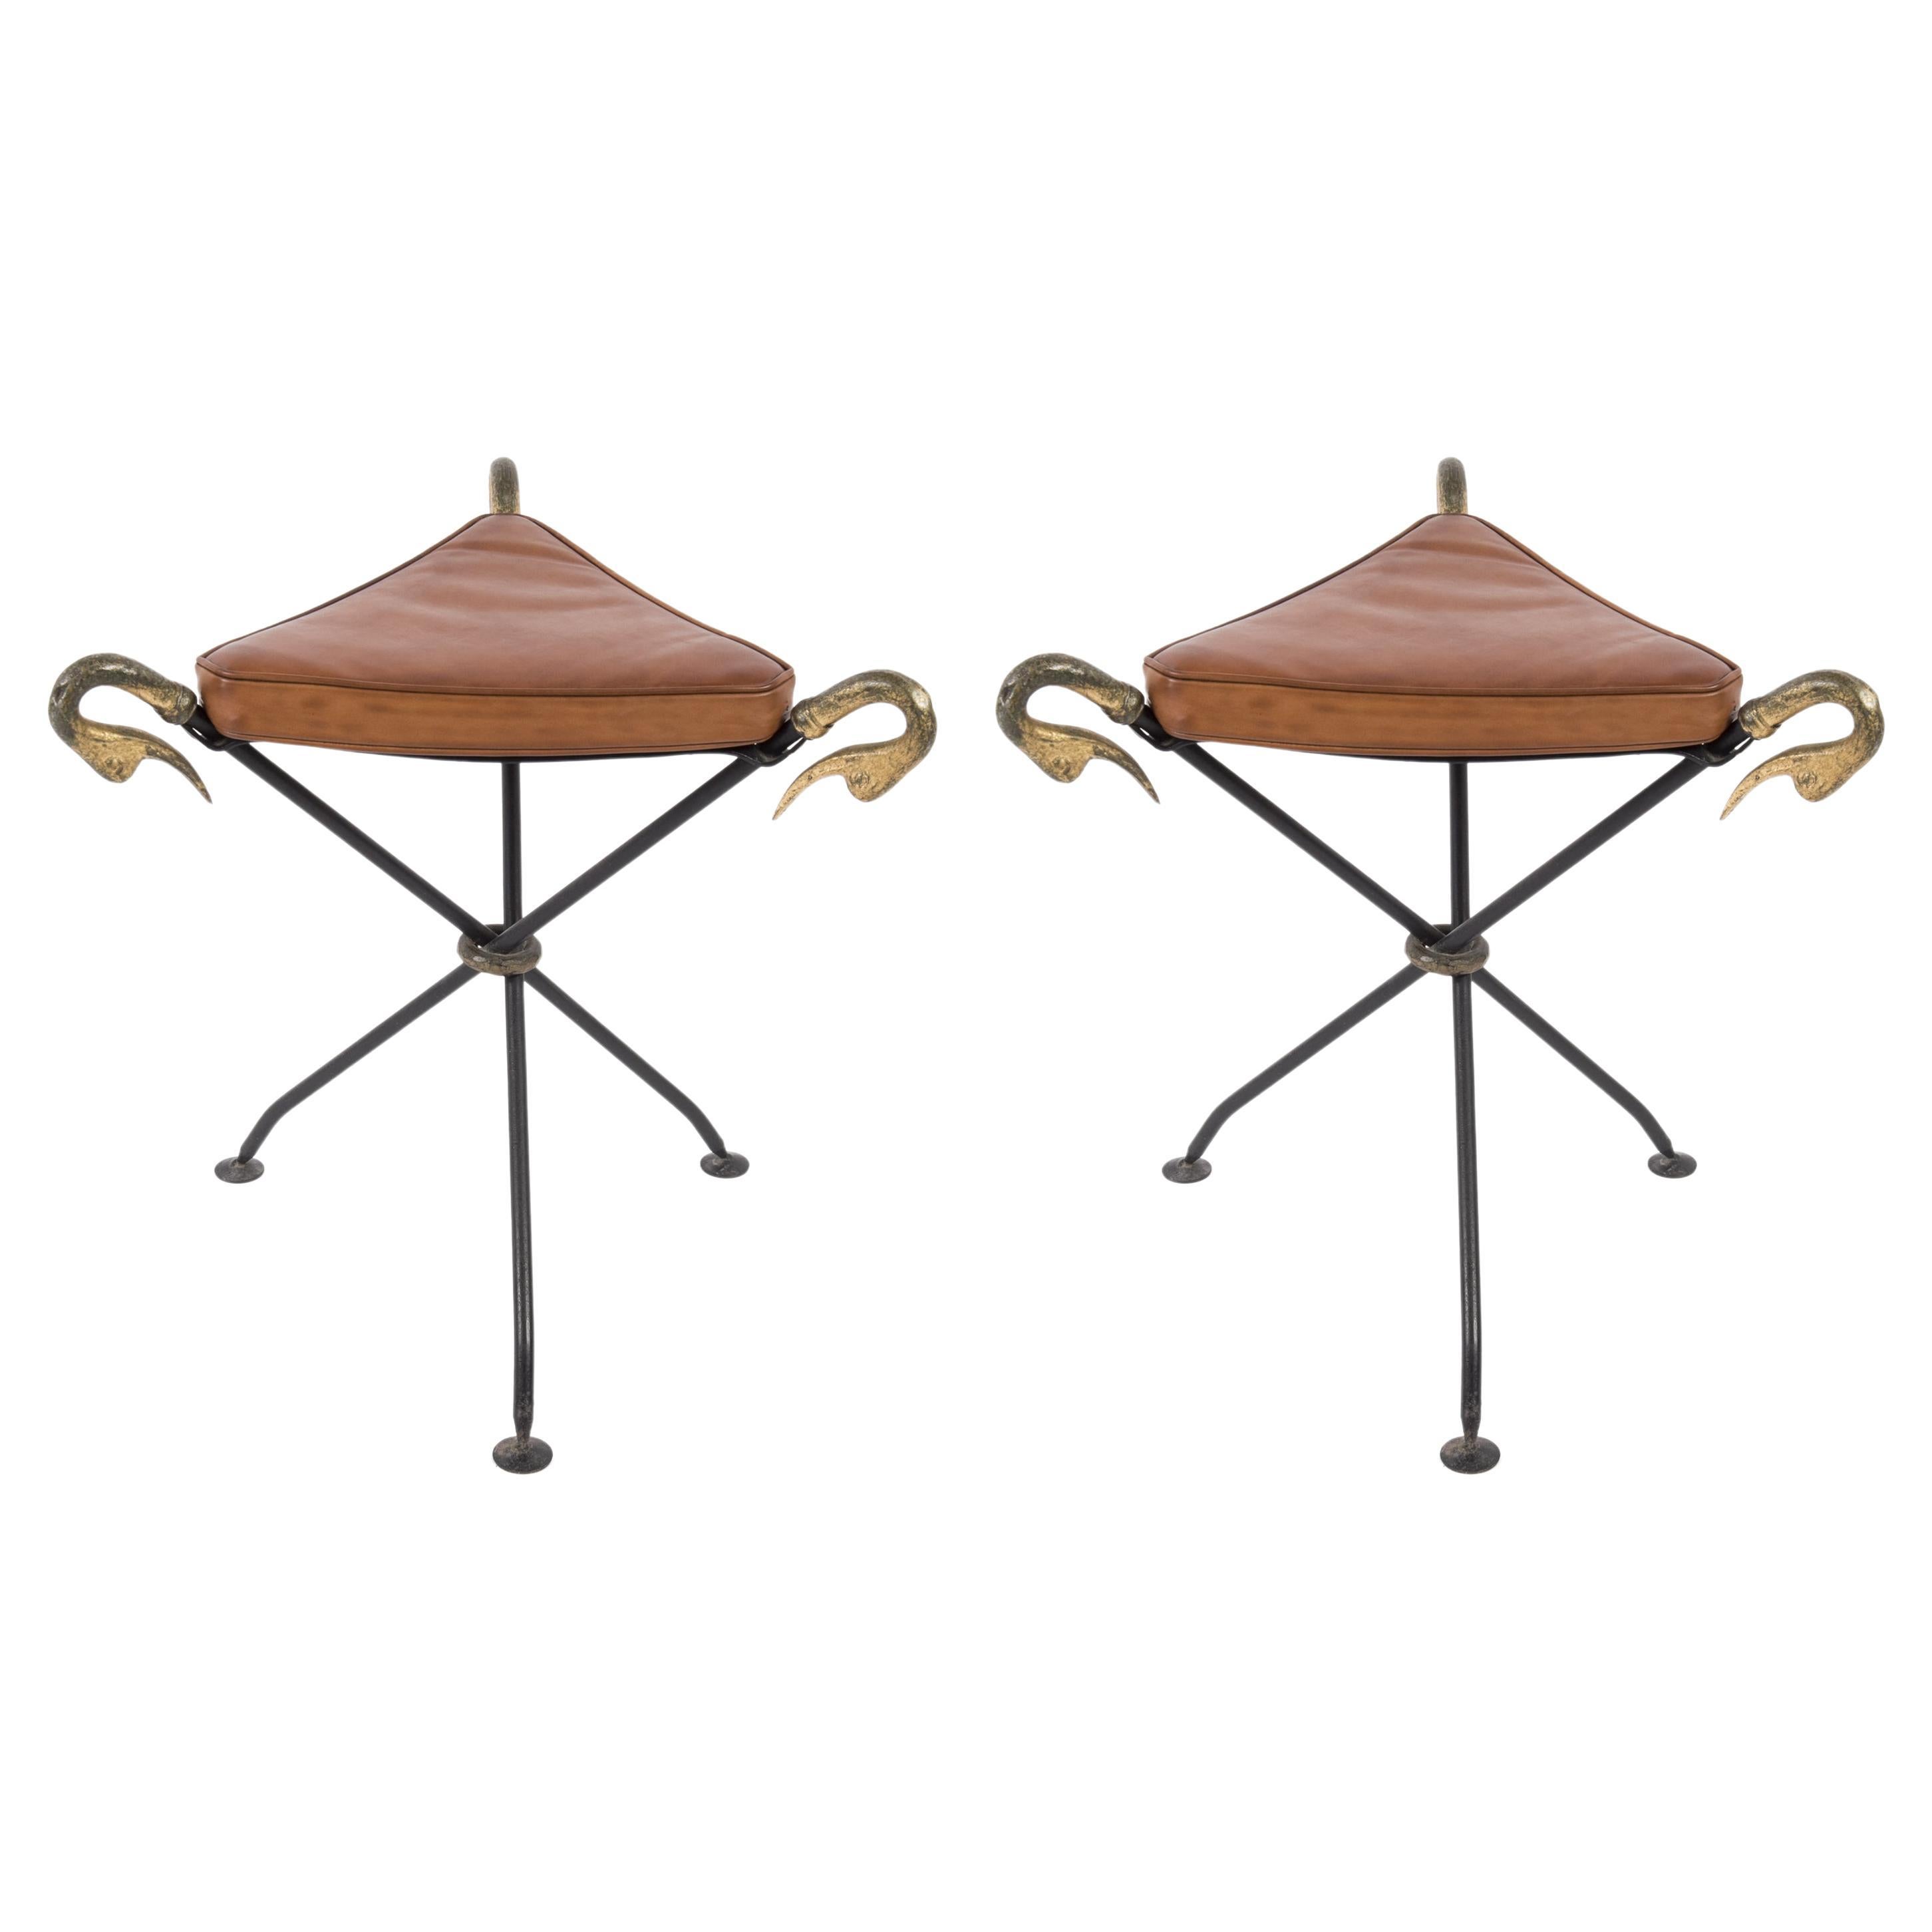 Pair of Neo-Classic Stools Attributed to Maison Jansen For Sale